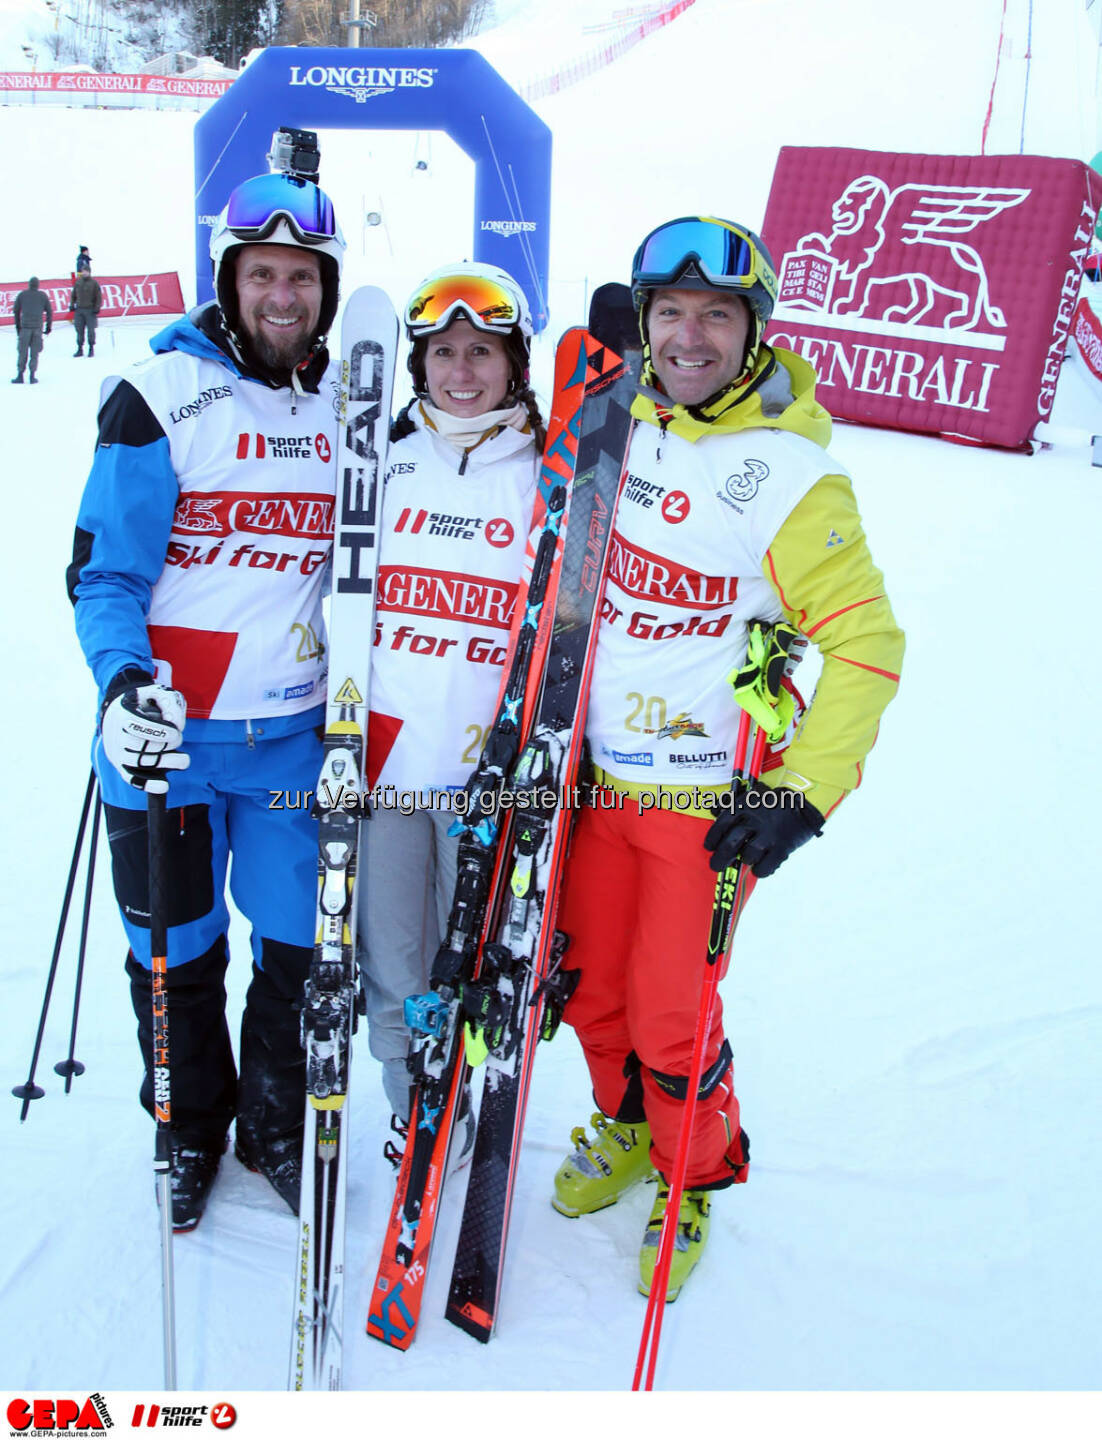 Ski for Gold Charity Race. Image shows Marco Buechel, Brigitte Kliment-Obermoser and Hans Knauss. Photo: GEPA pictures/ Harald Steiner